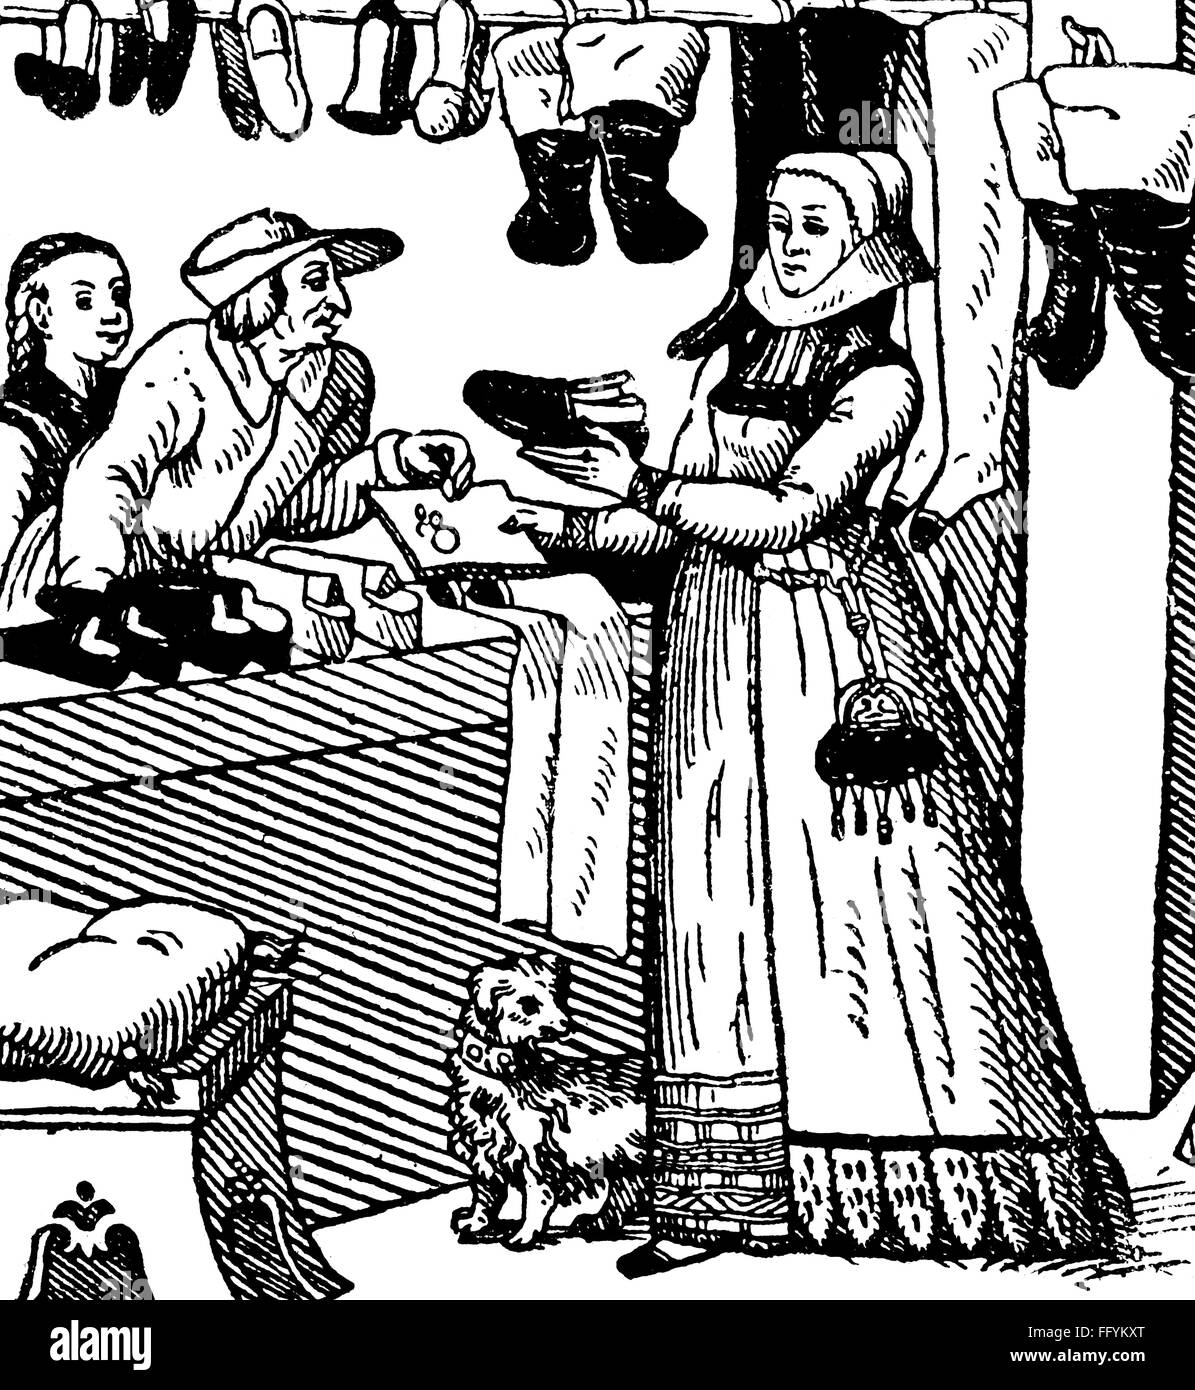 craft / handcraft,professions,shoemaker,female master shoemaker selling shoes to farmer couple,woodcut,late 16th century,detail,16th century,graphic,graphics,trade,sale,sales,shop,shops,shoemaker,shoemakers,shoe,shoes,half length,standing,clothes,outfit,outfits,bonnet,bonnets,collar,collars,farmer,farmers,peasants,peasant,payment,paying,pays,dog,dogs,retail store,retail outlet,retail stores,retail outlets,handicraft,handcraft,craft,profession,professions,selling,sell,historic,historical,female,woman,woman,mal,Additional-Rights-Clearences-Not Available Stock Photo